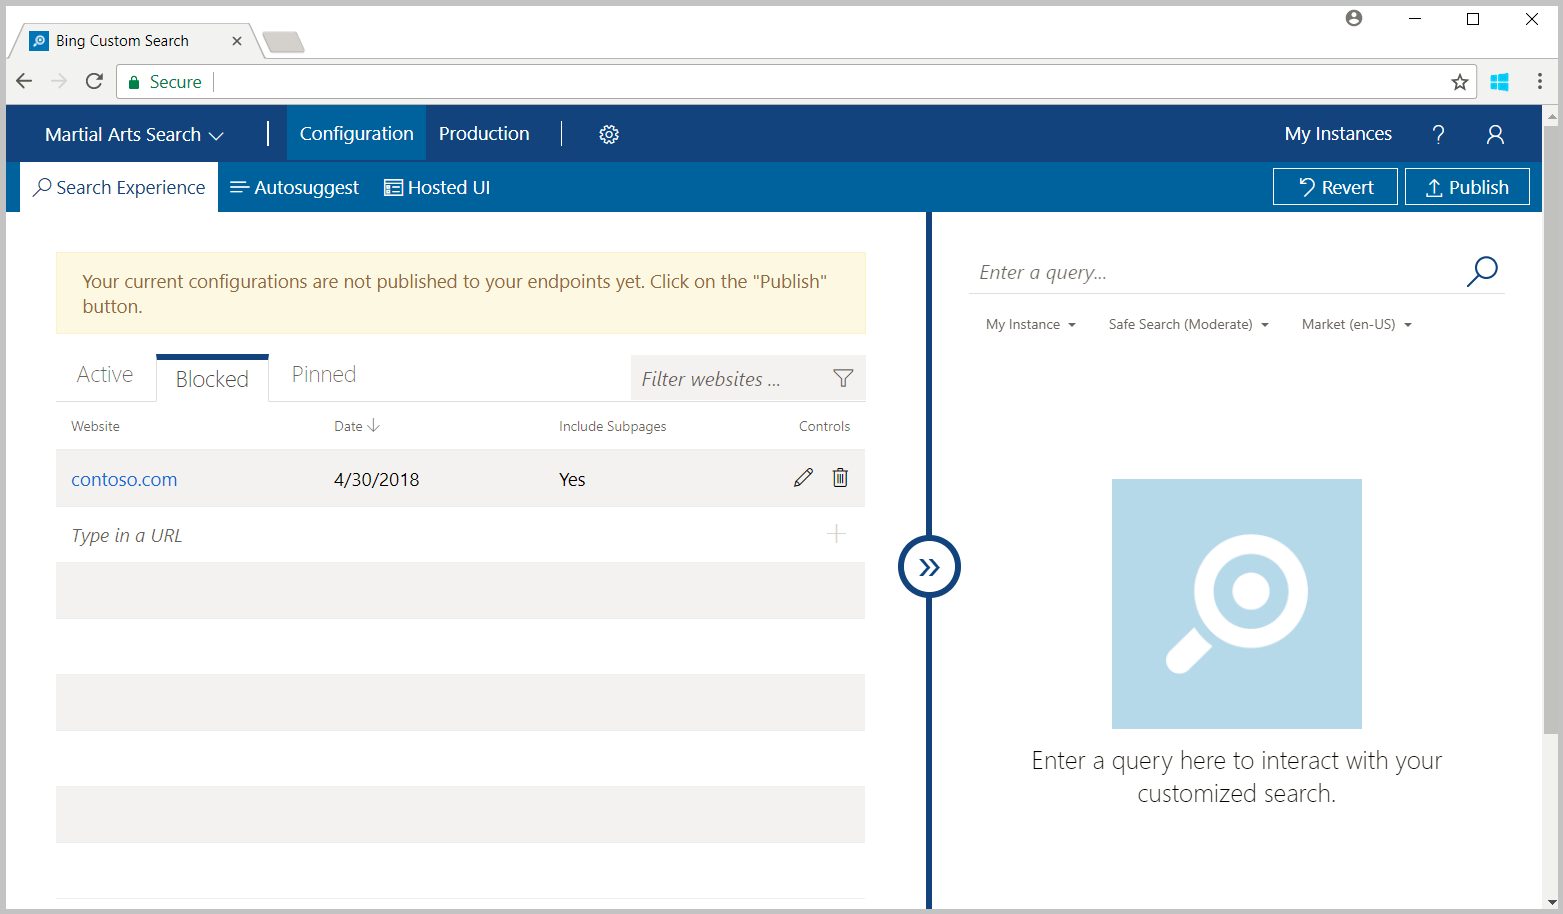 A picture of the Bing Custom Search portal